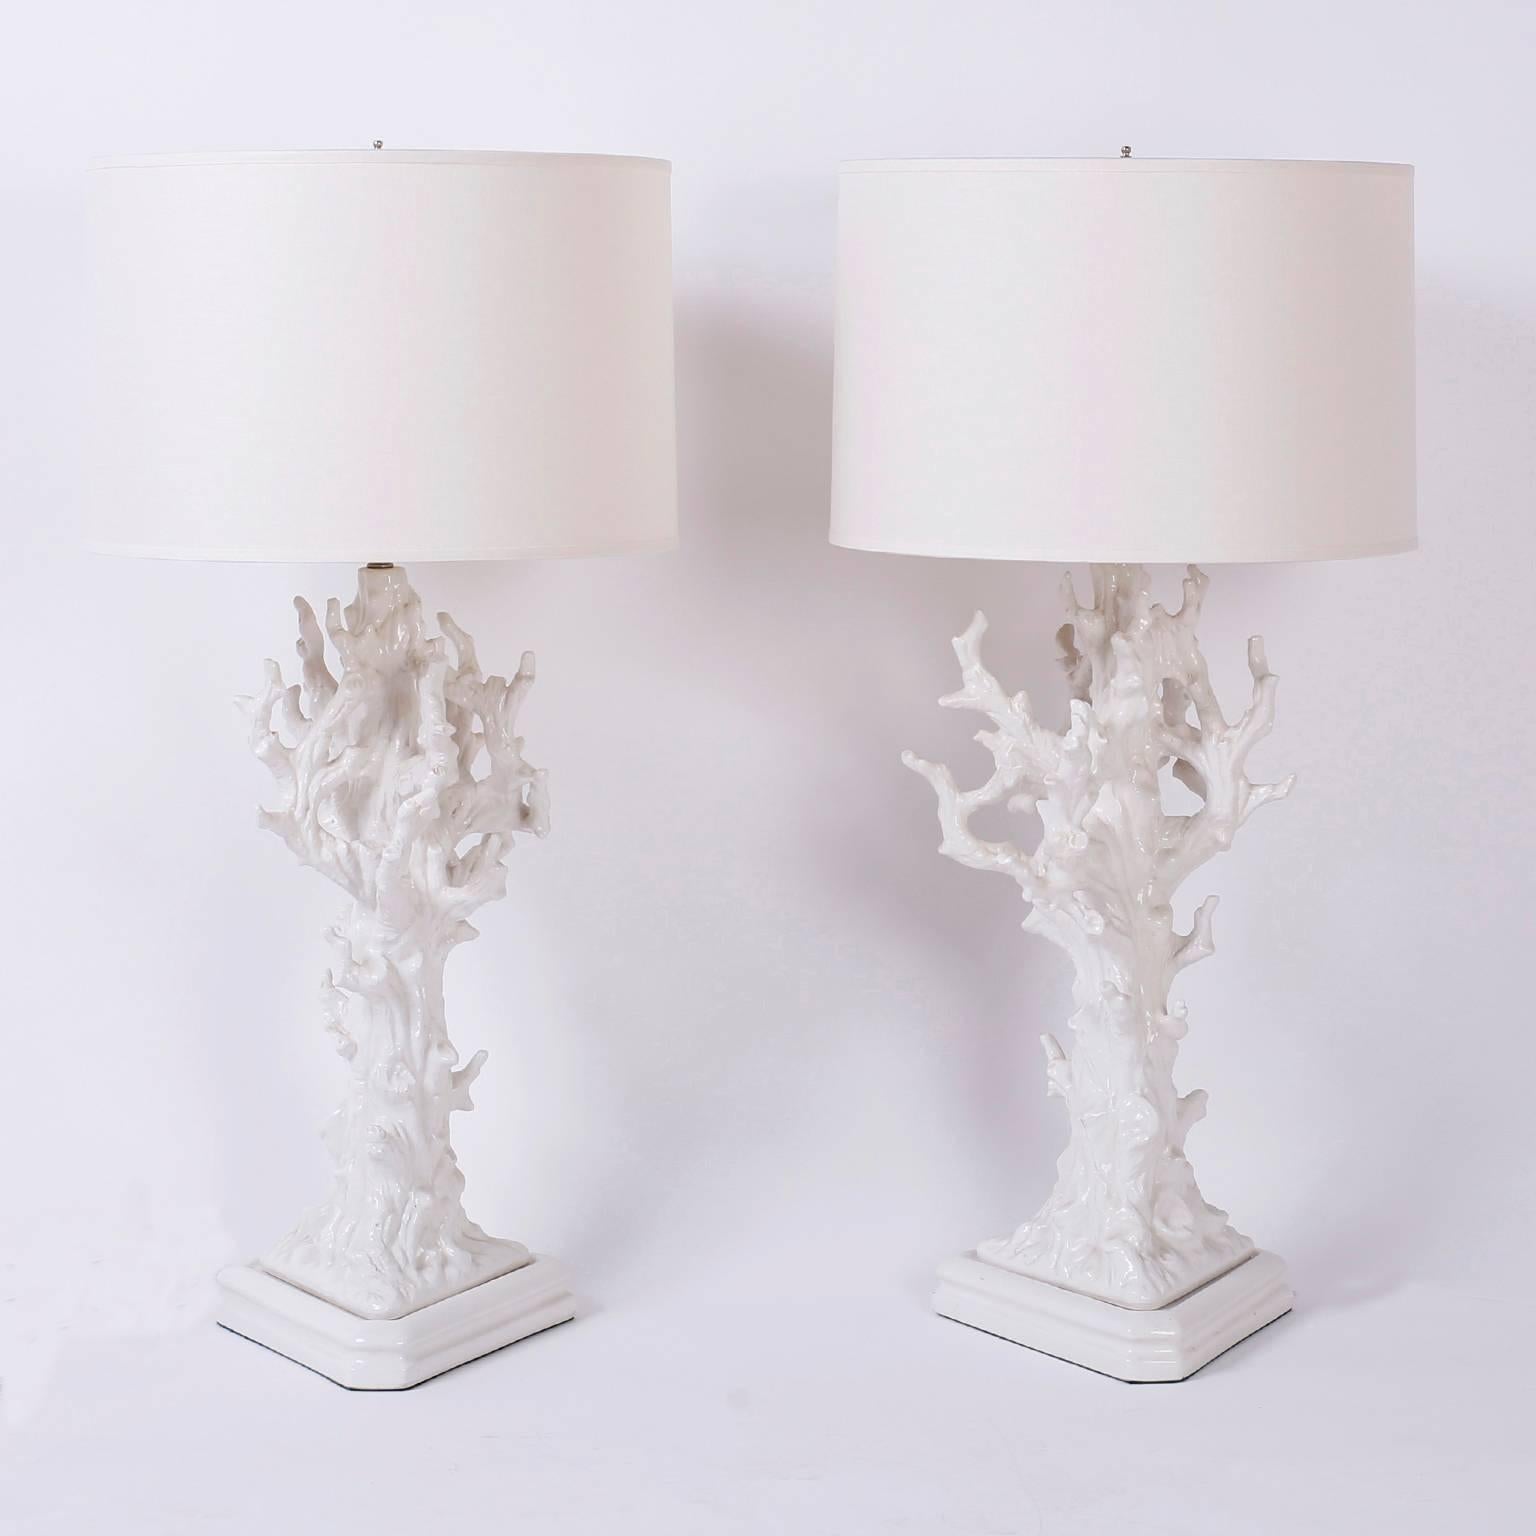 Striking pair of midcentury white porcelain table lamps depicting coral structures and set on triangular porcelain bases. Perfect for coastal or island living or any living that needs a decorative pop. Newy li.

 